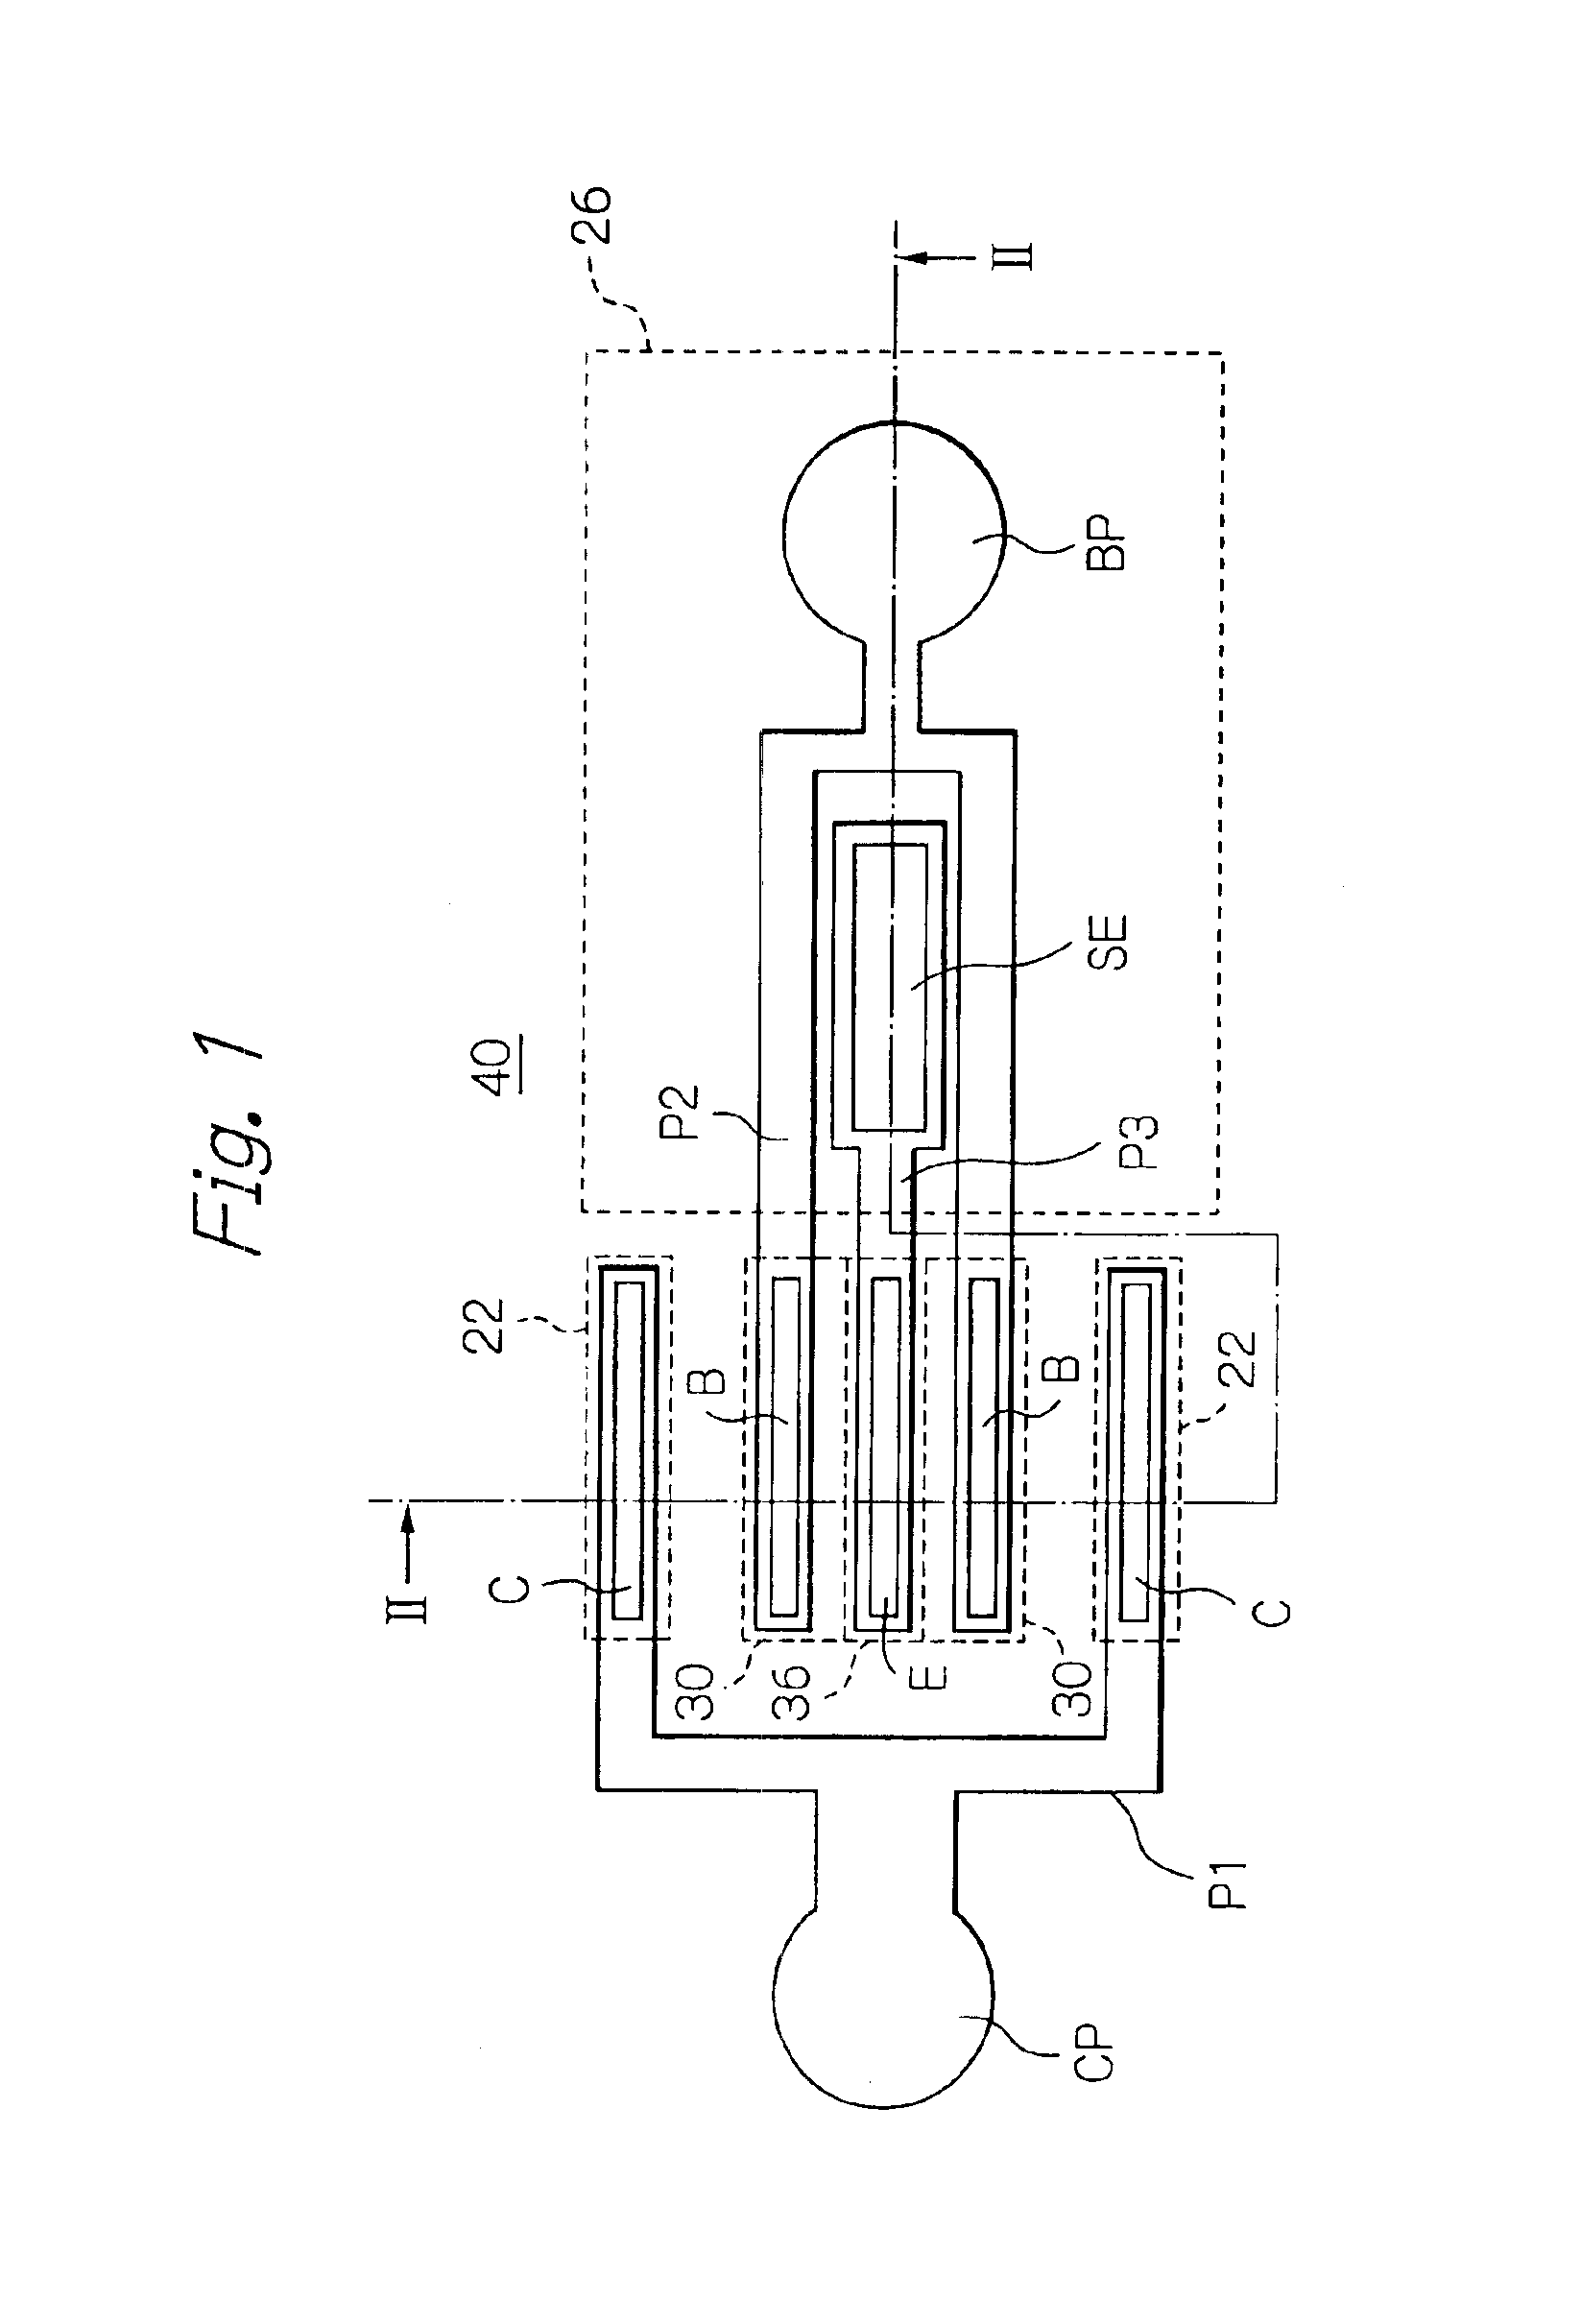 Semiconductor device including bipolar junction transistor, and production method therefor